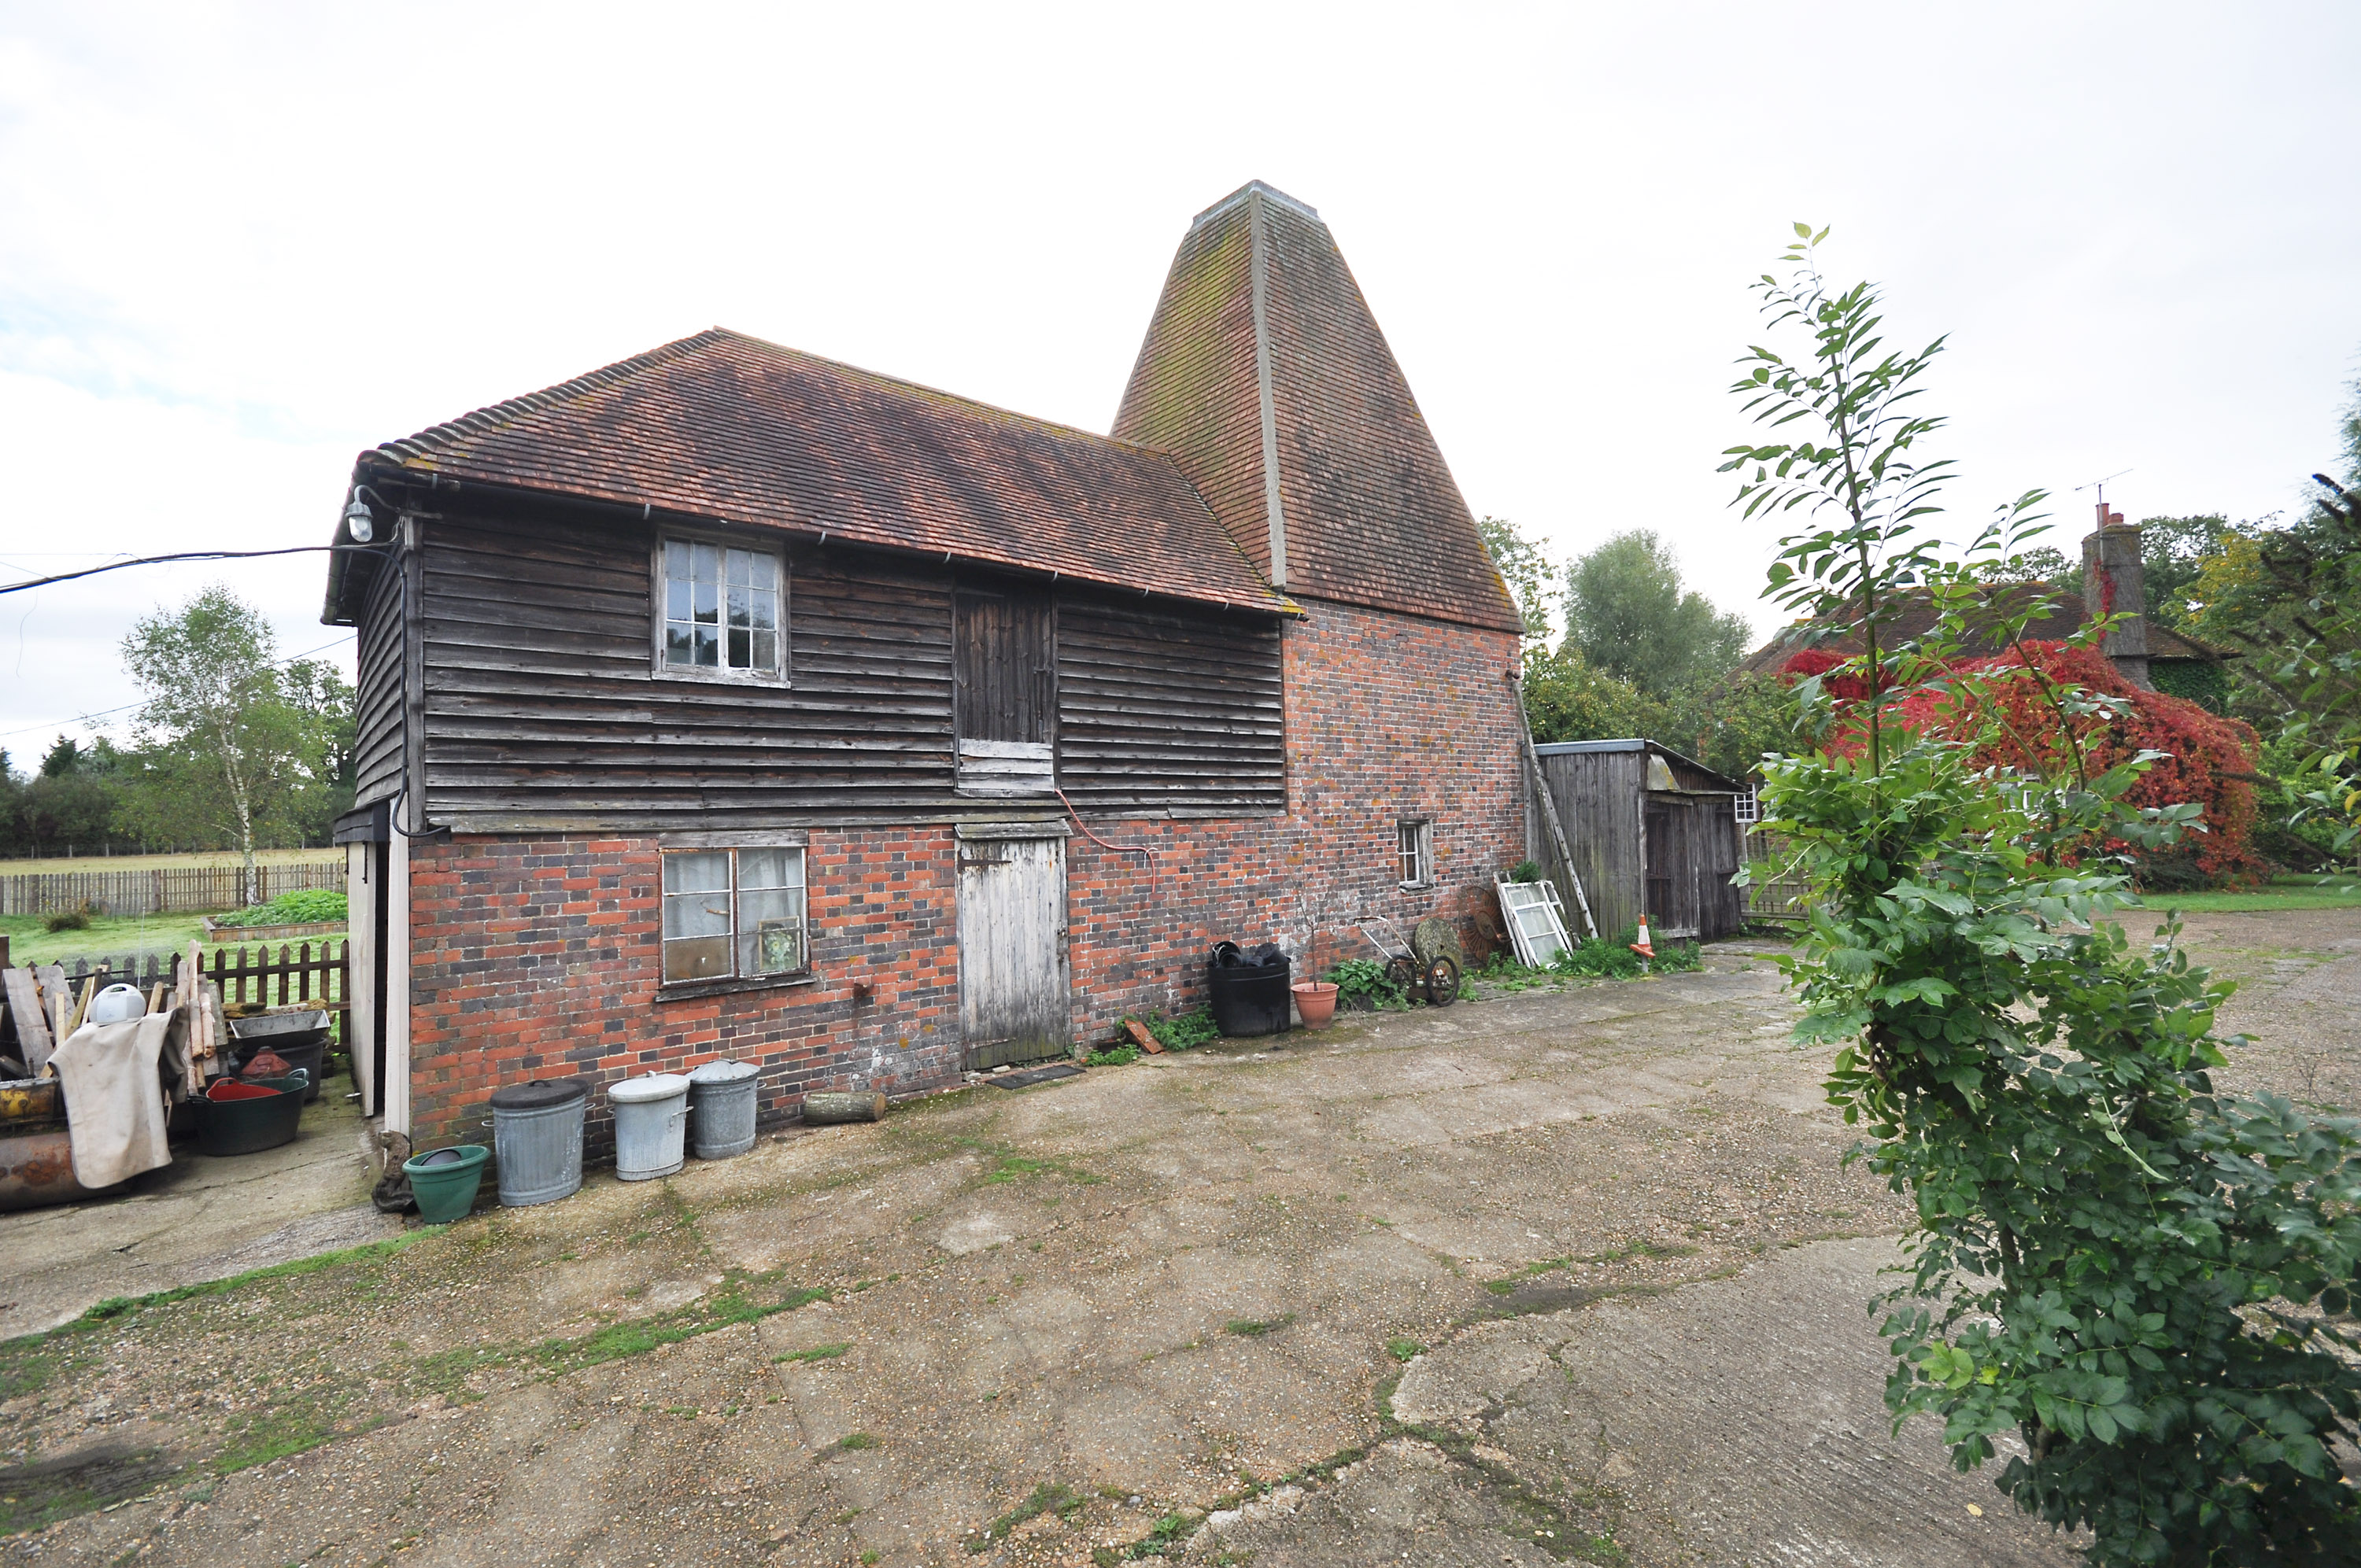 Darling Buds of May farm for sale